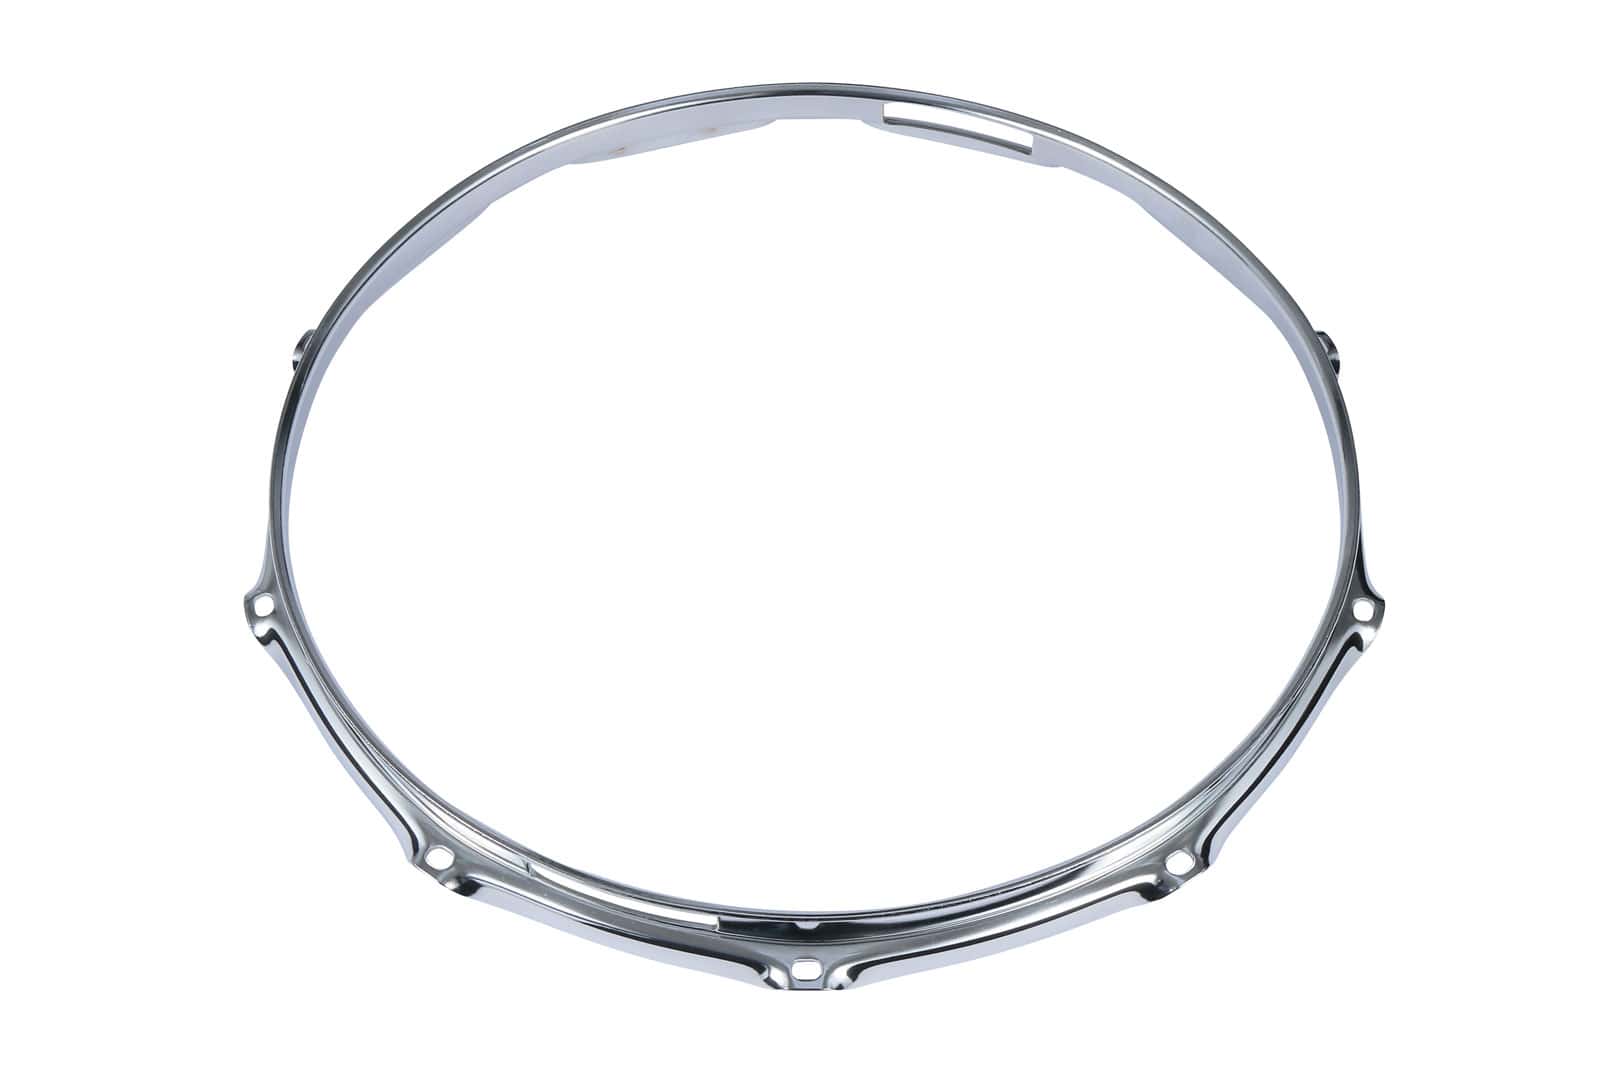 TAMA CERCLAGE STEEL MIGHTY HOOP 10 TROUS (TIMBRE) 14